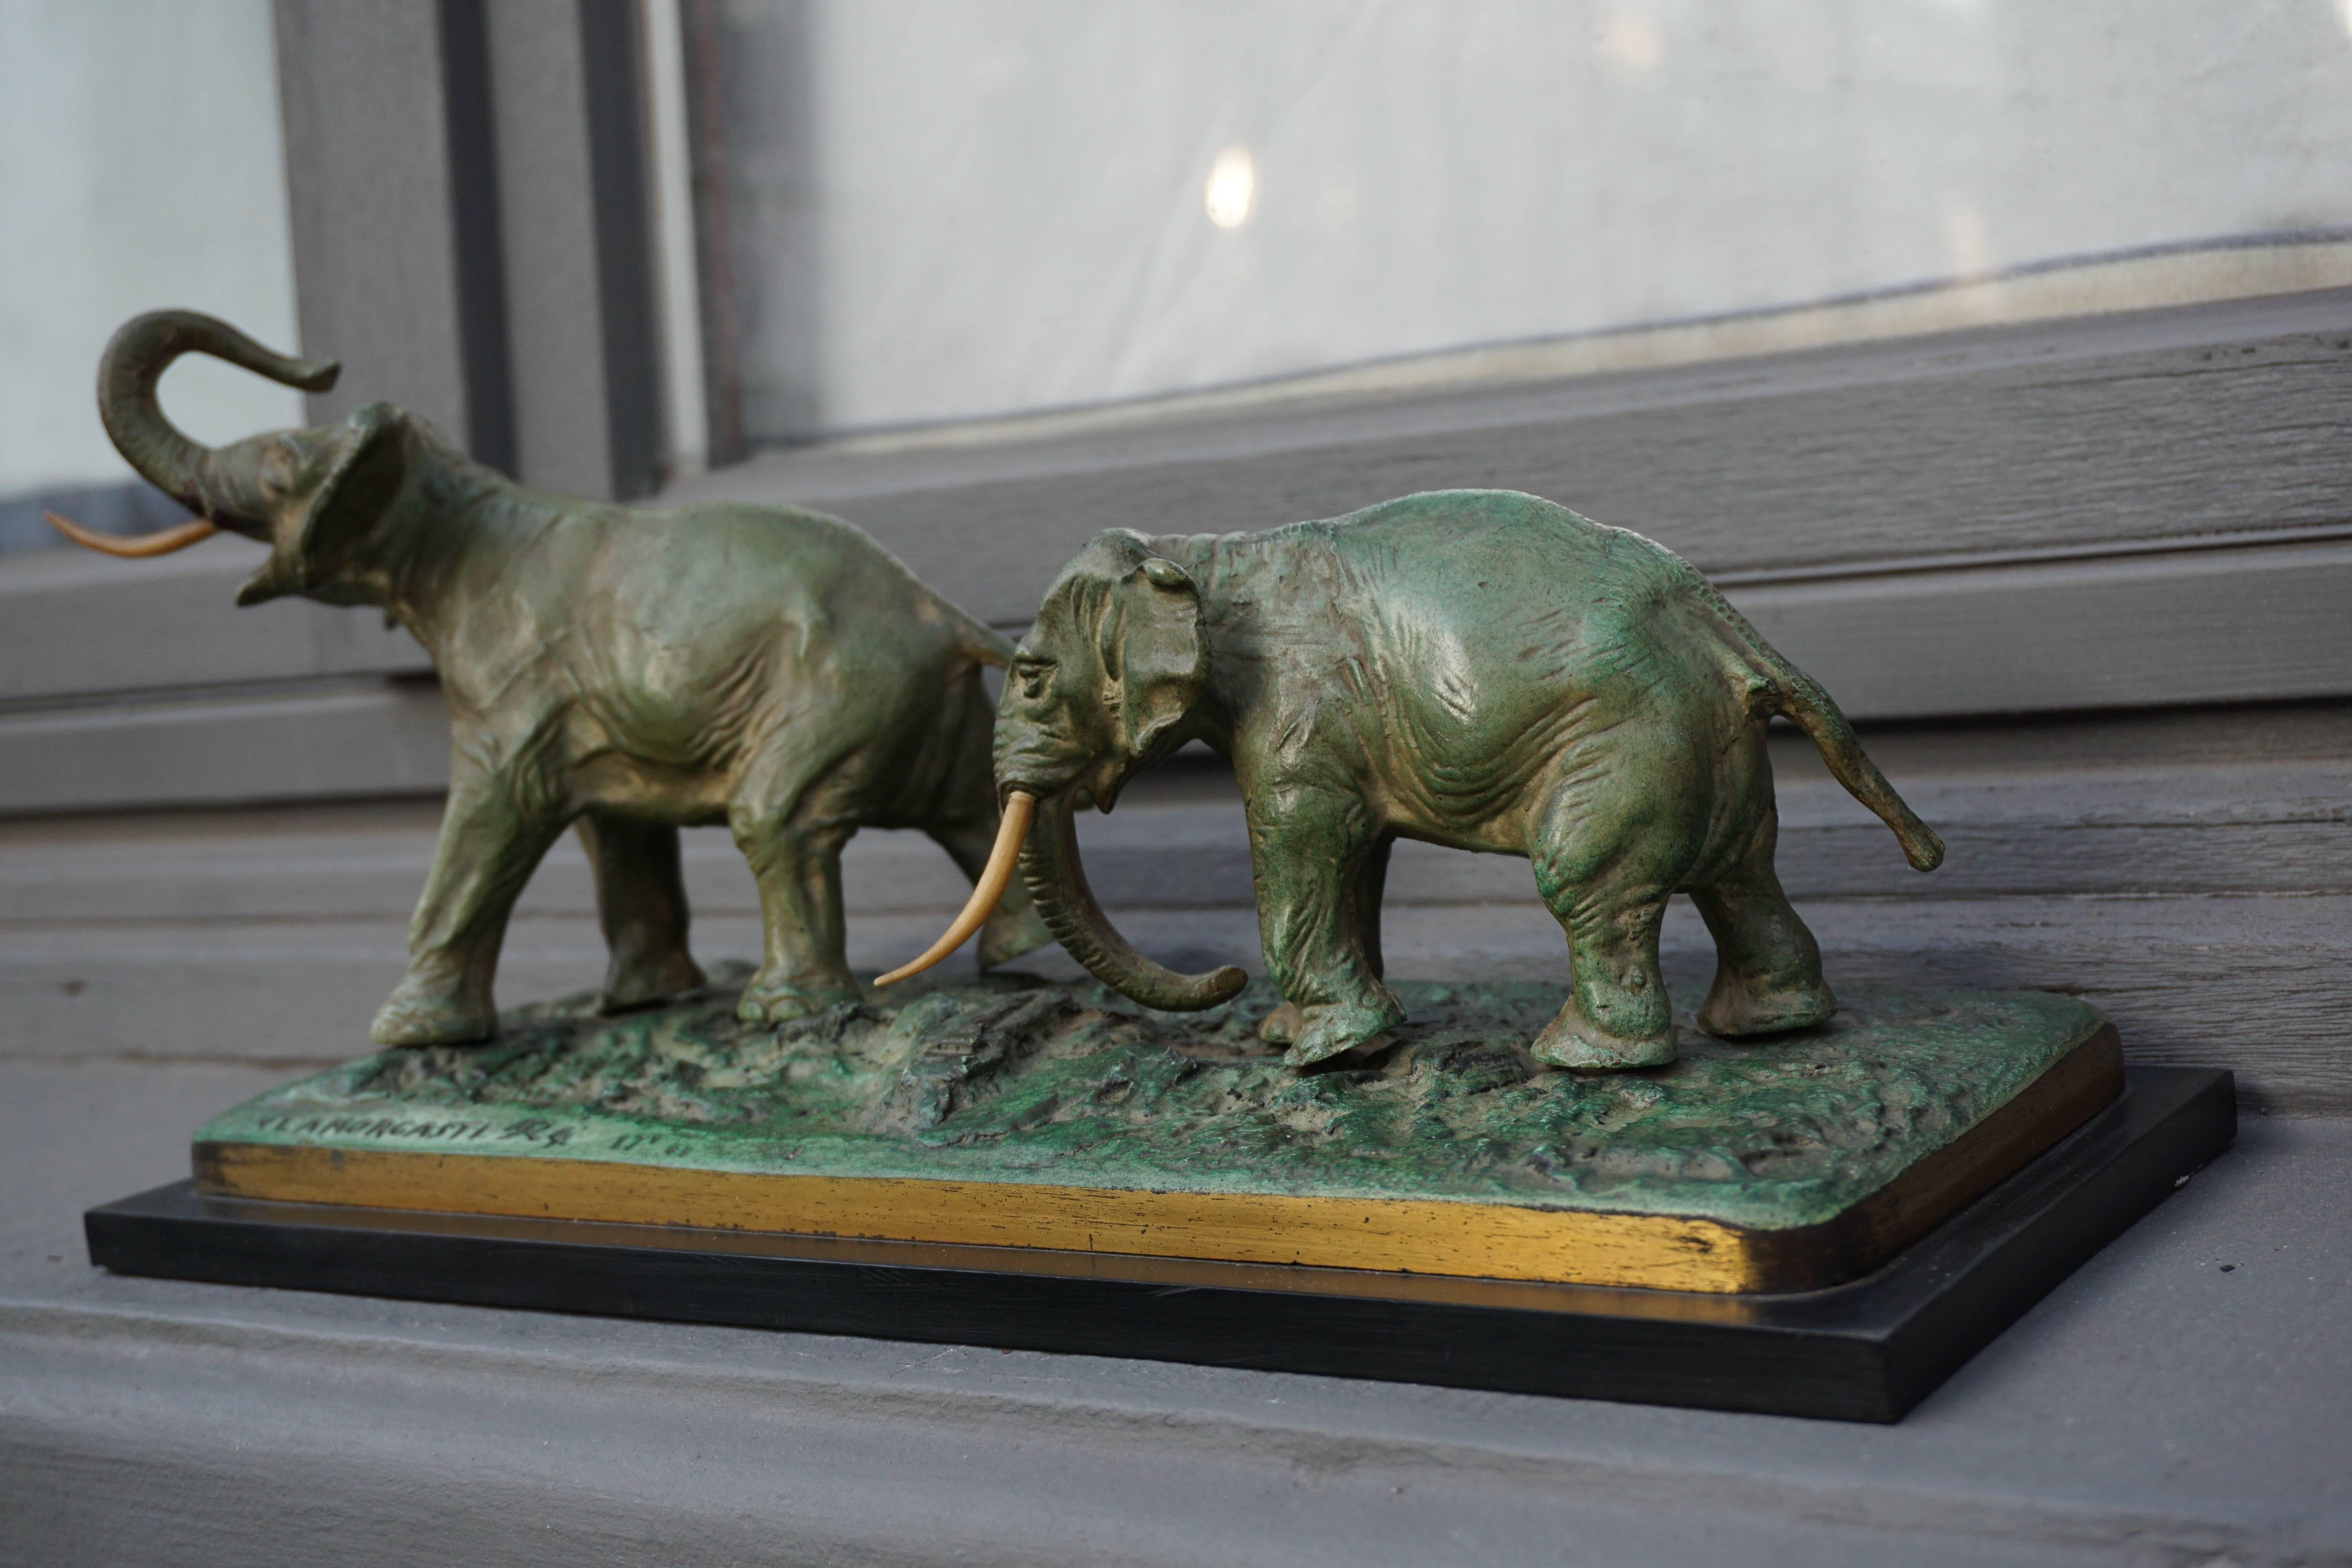 Early 20th century bronze sculpture of two elephants with a patinated bronzed finish. 

The base signed Ant.Amorgasti, 1924.
Antonio Amorgasti,(1880-1942) was a sculptor who, interestingly, also worked at Antwerp Zoo.

Belgium, circa